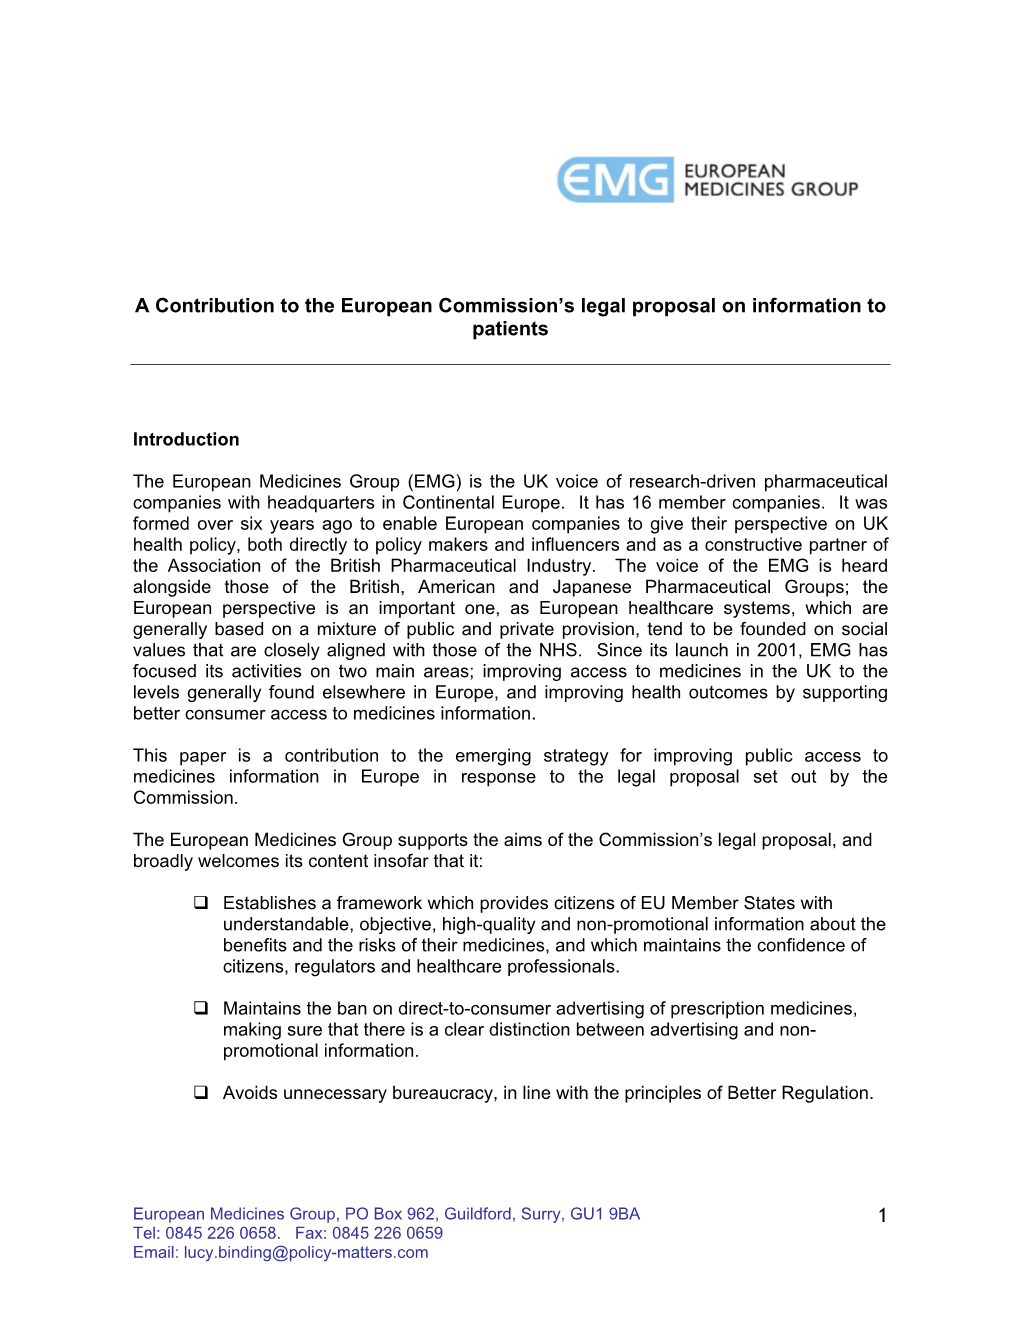 Response to the European Commission Legal Proposal On